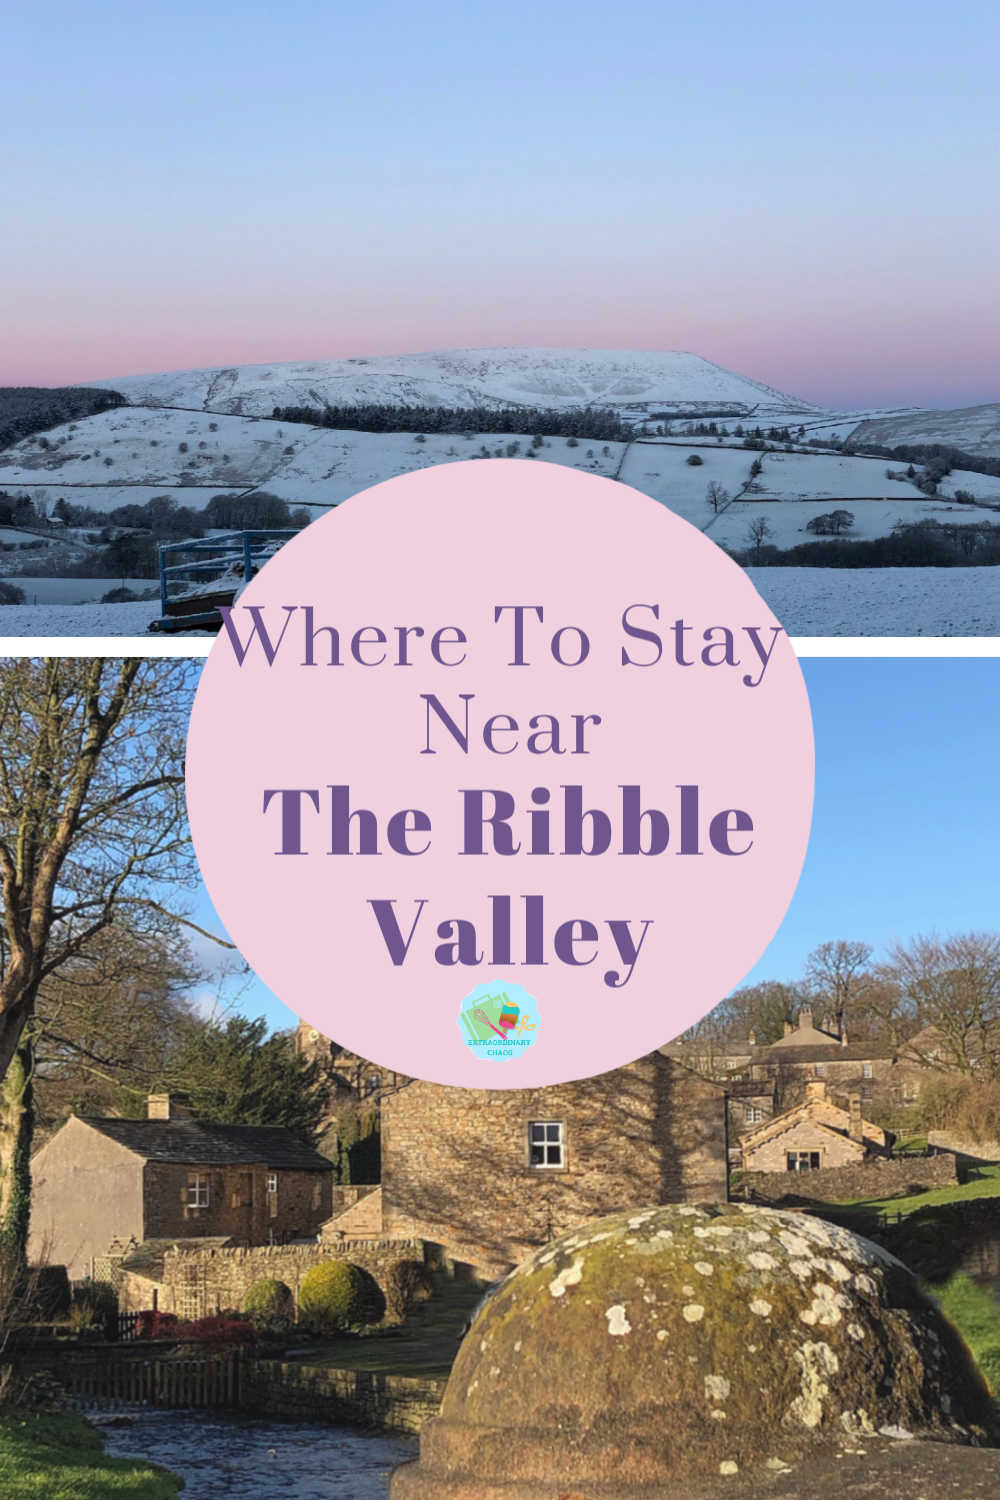 Cottages for holidays in the Ribble Valley